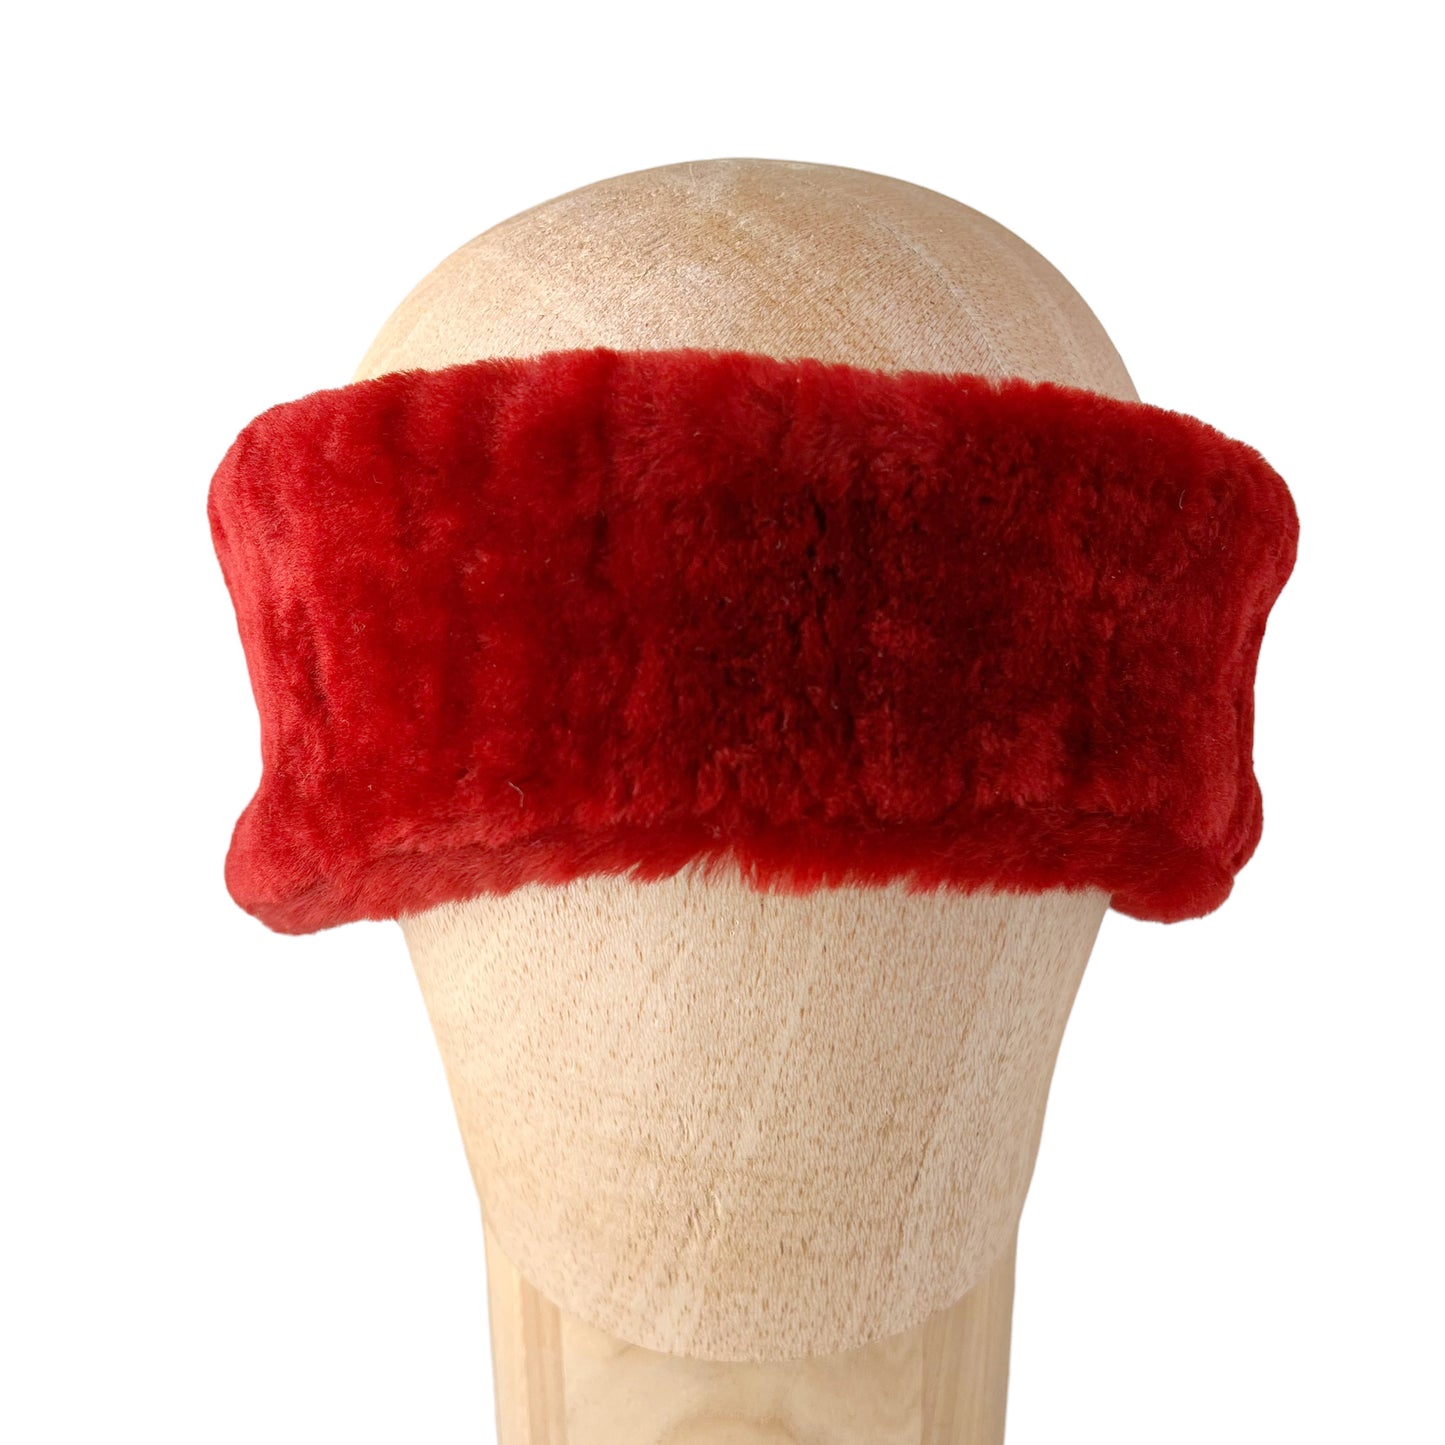 Soft Ruby Red Alpine Ear and Head Sheep Shearling Fur Band